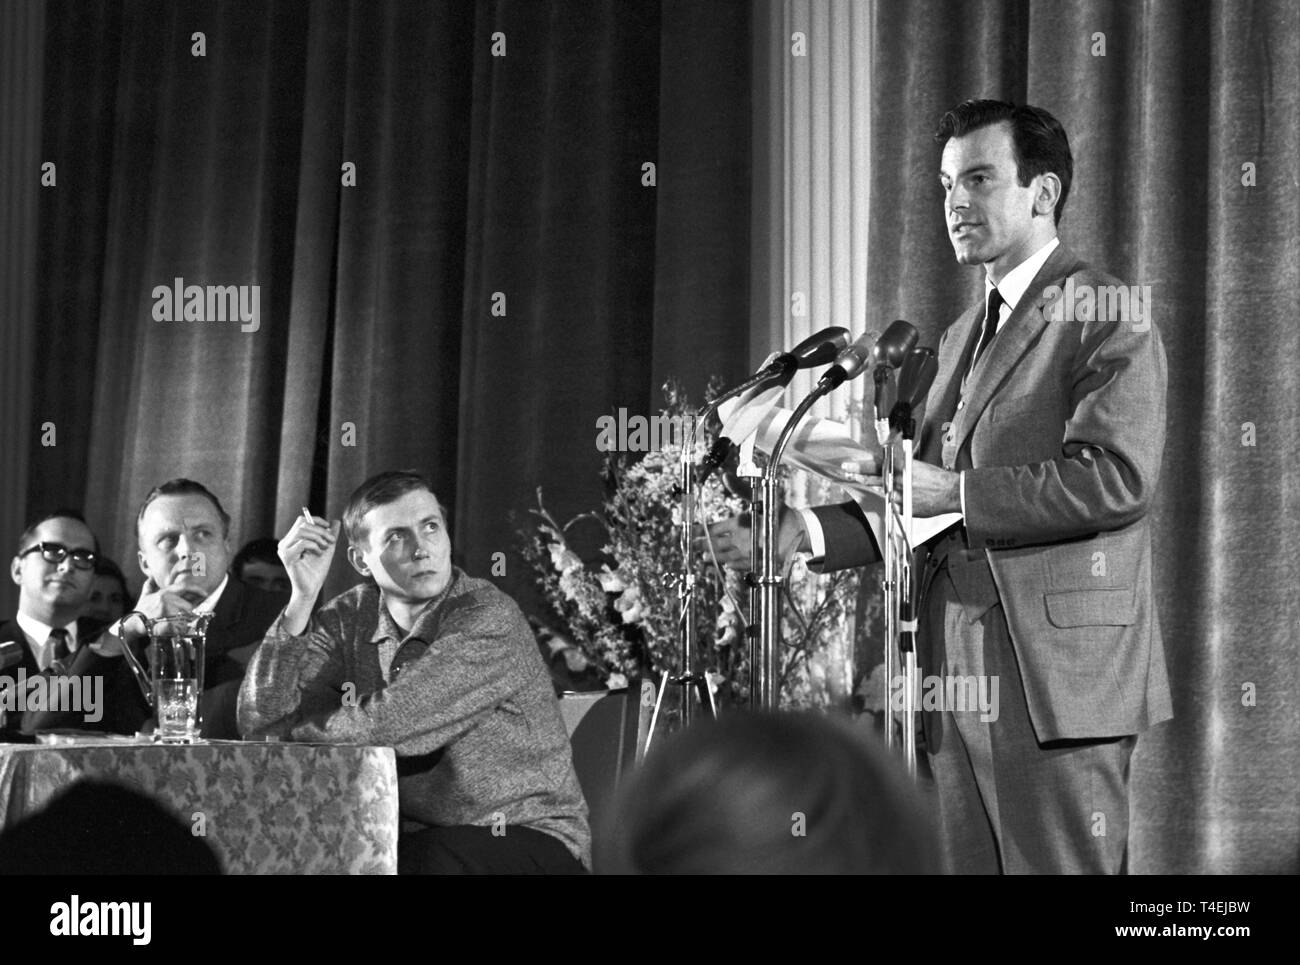 A lecture evening of Russian poet Yevgeny Yevtushenko takes place on the 21st of January in 1963 in Munich. The picture shows Maximilian Schell, who reads out the German version of some of the poems. To the left Yevgeny Yevtushenko. | usage worldwide Stock Photo